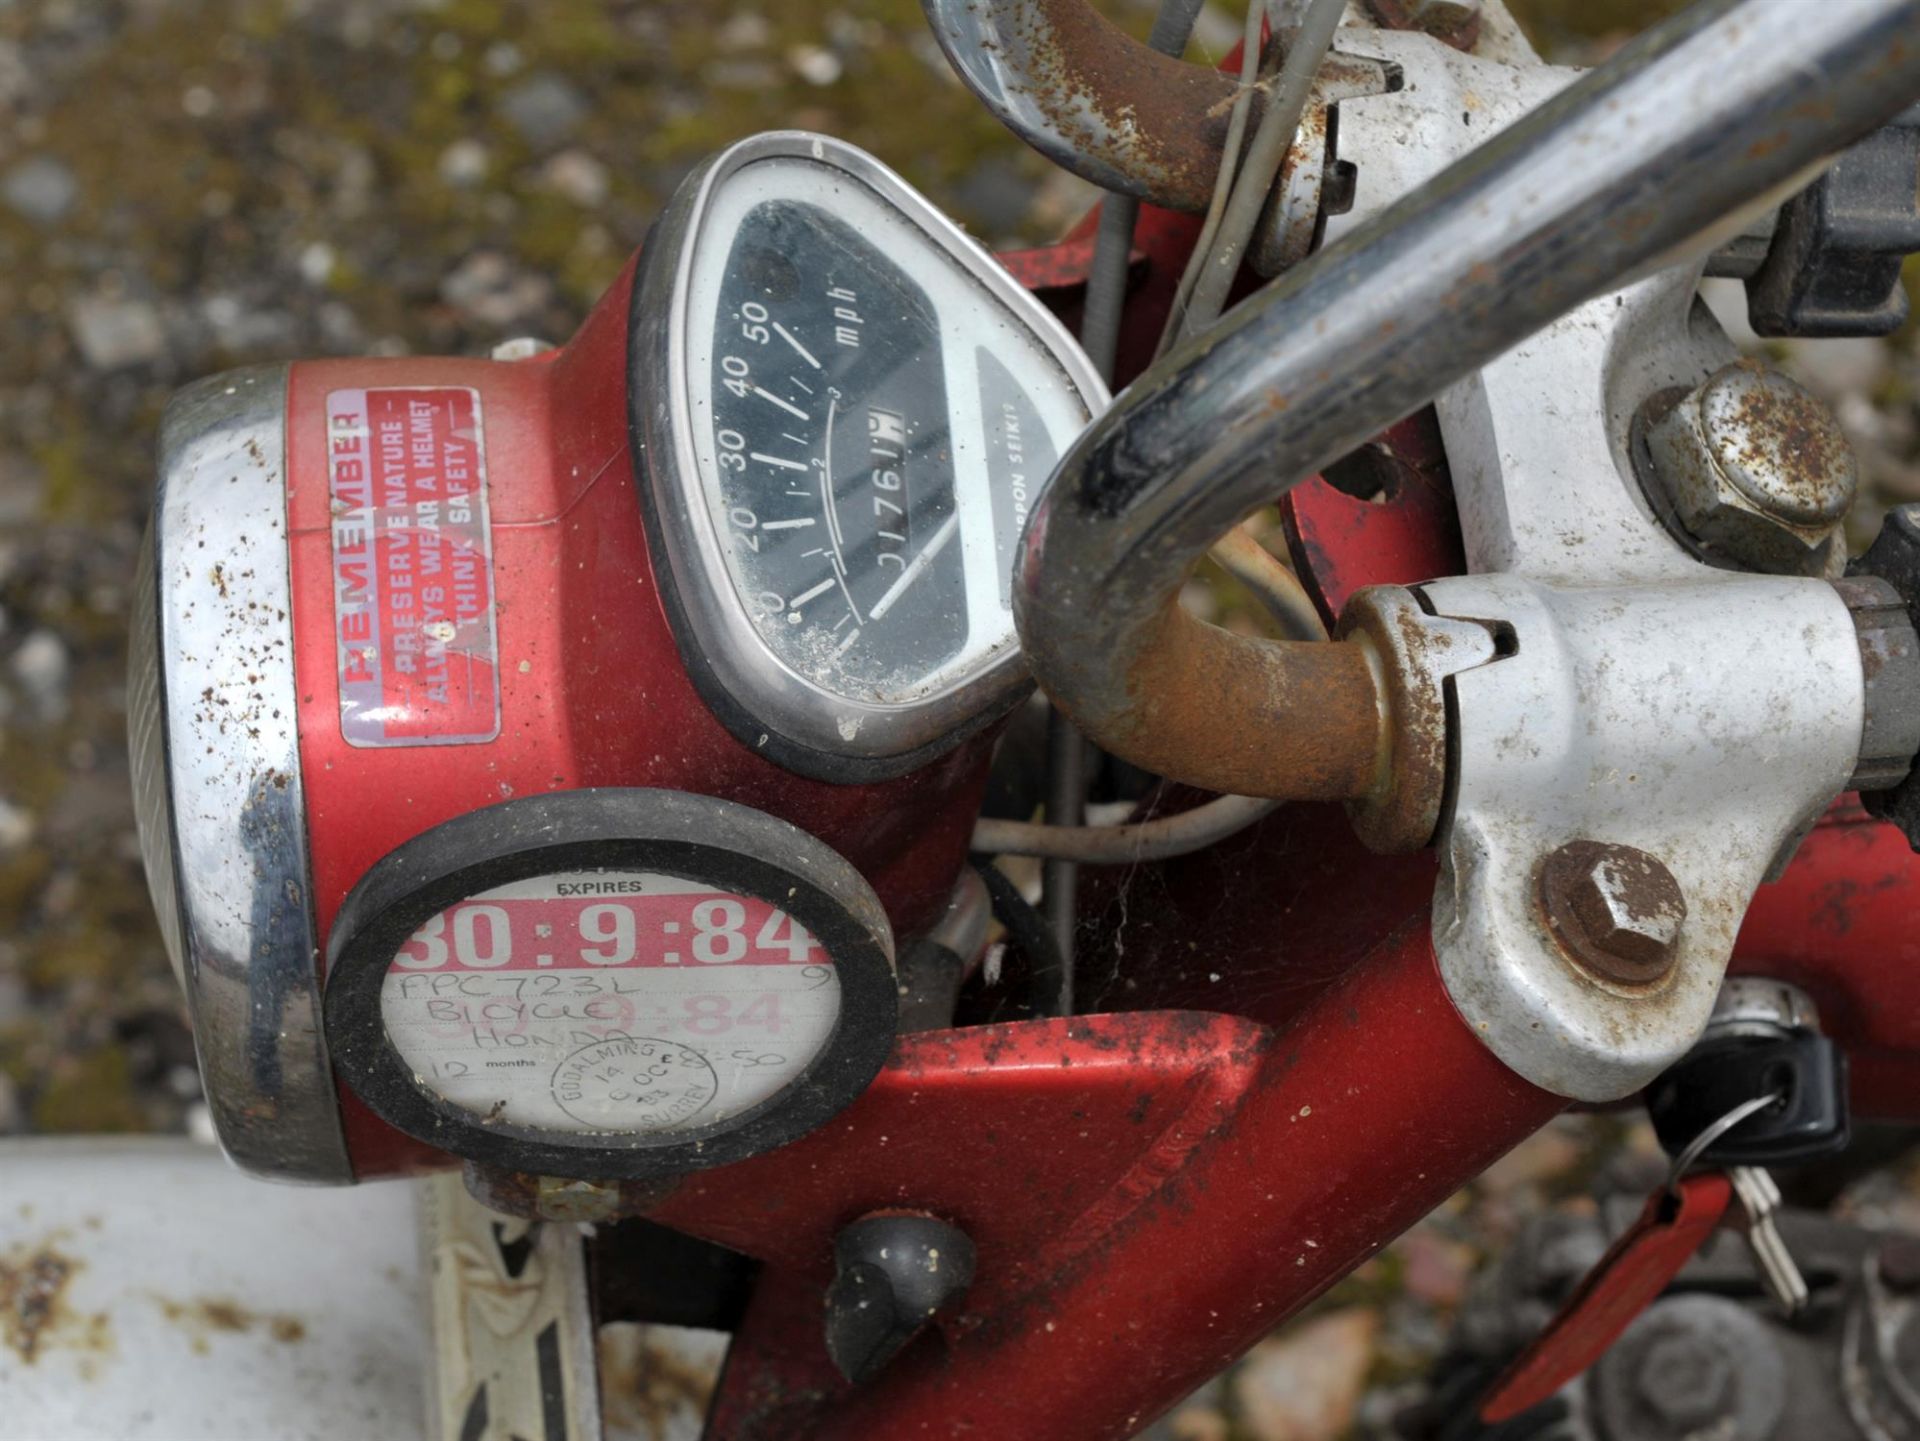 Motor Bike, Honda 70, Monkey Bike, red chassis. Registration number PPC 723L, comes with Original - Image 8 of 13